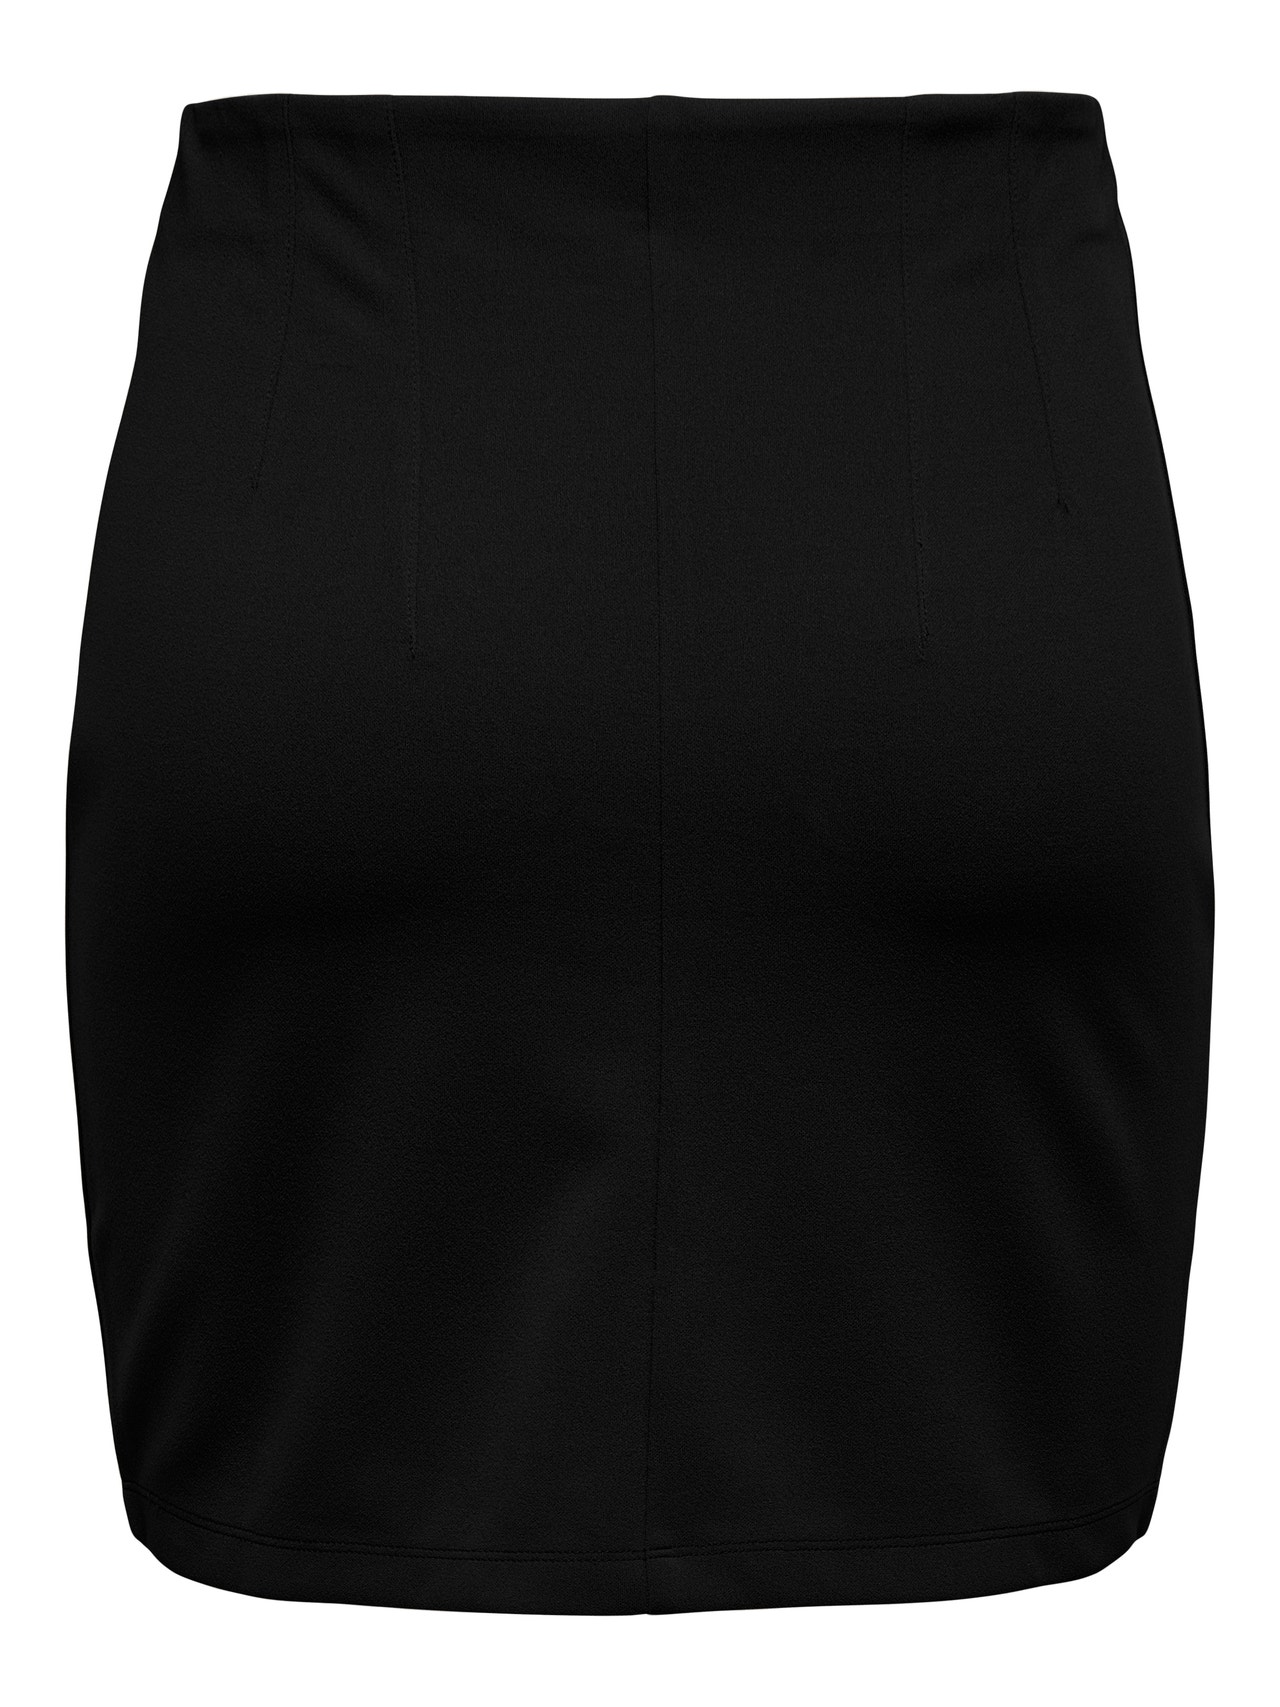 ONLY Jupe courte Taille moyenne -Black - 15288285